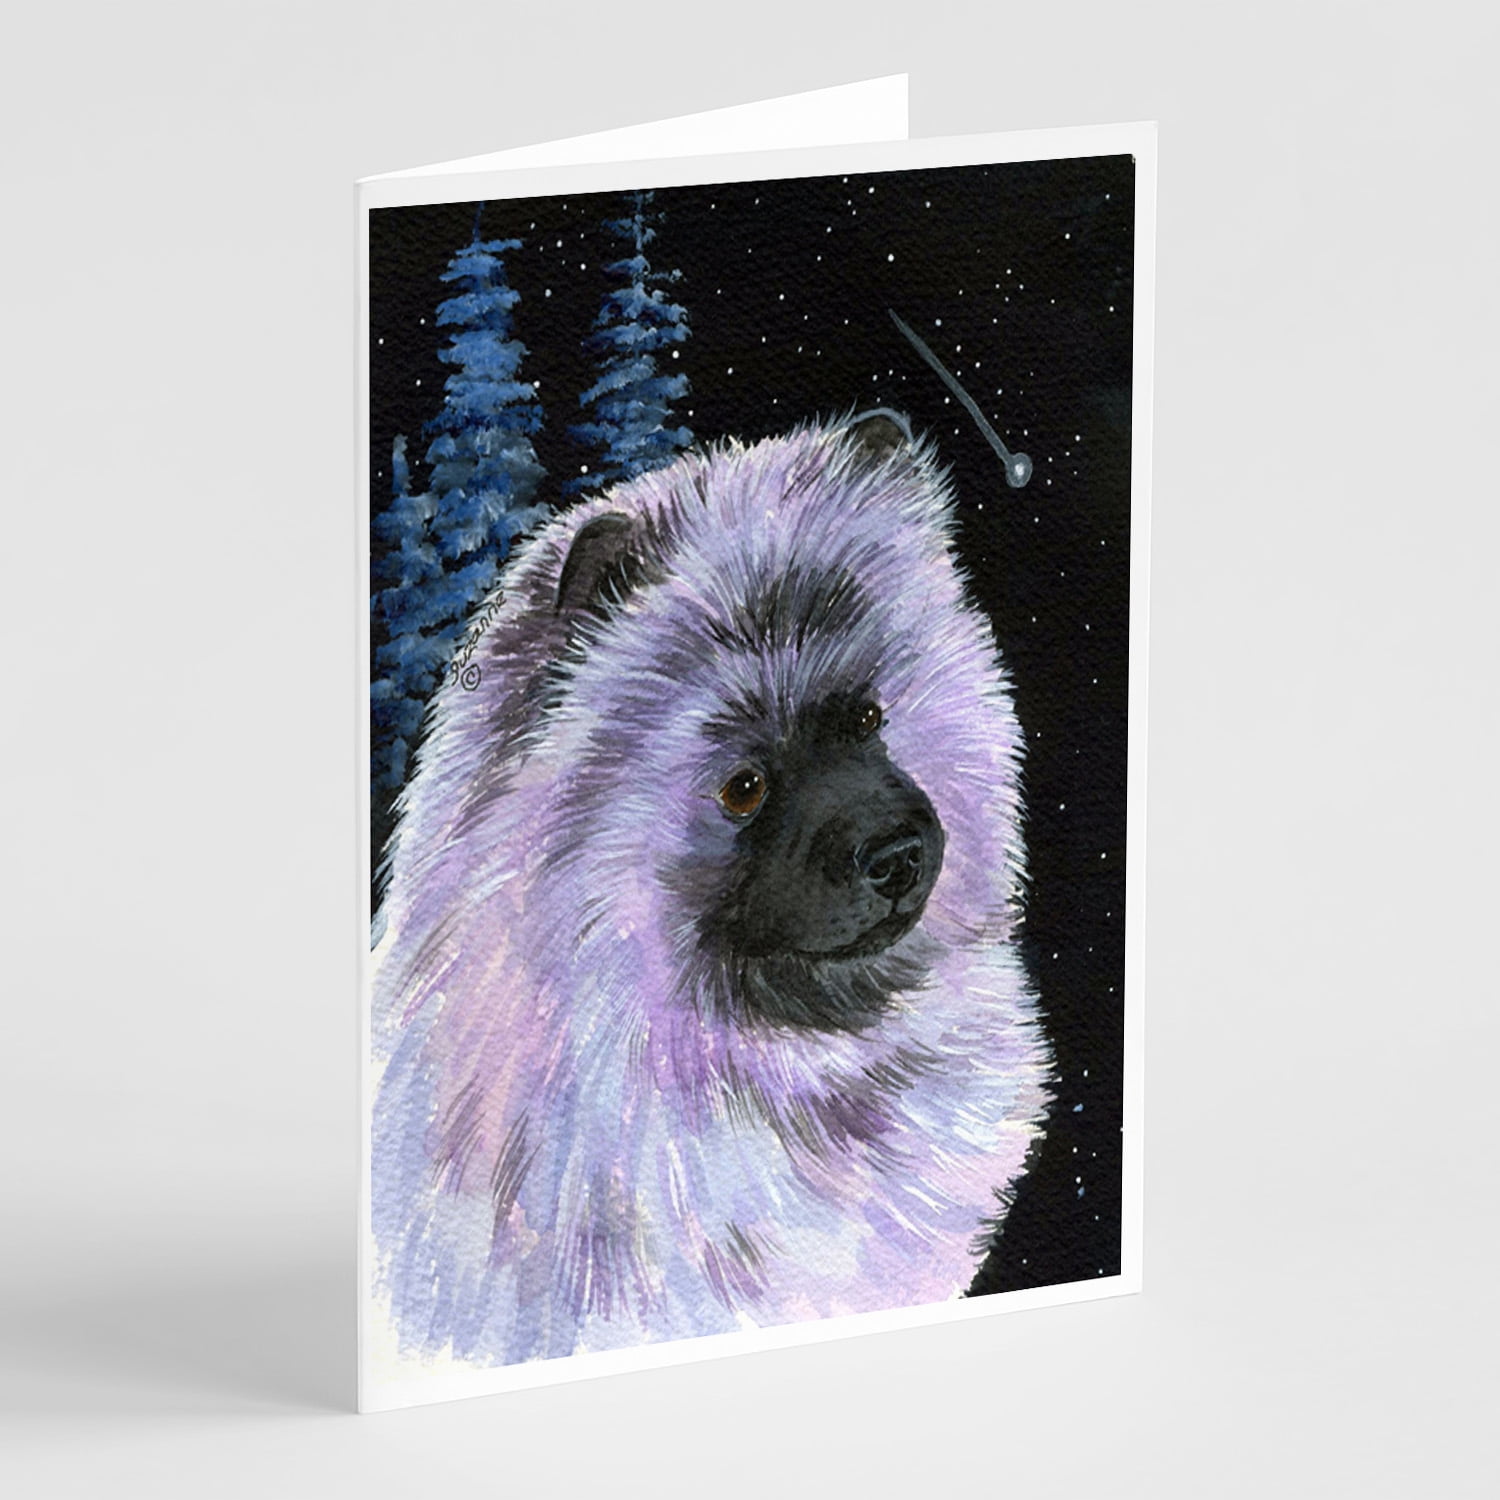 6 Keeshond Puppy Portrait Blank Art Note Greeting Cards 